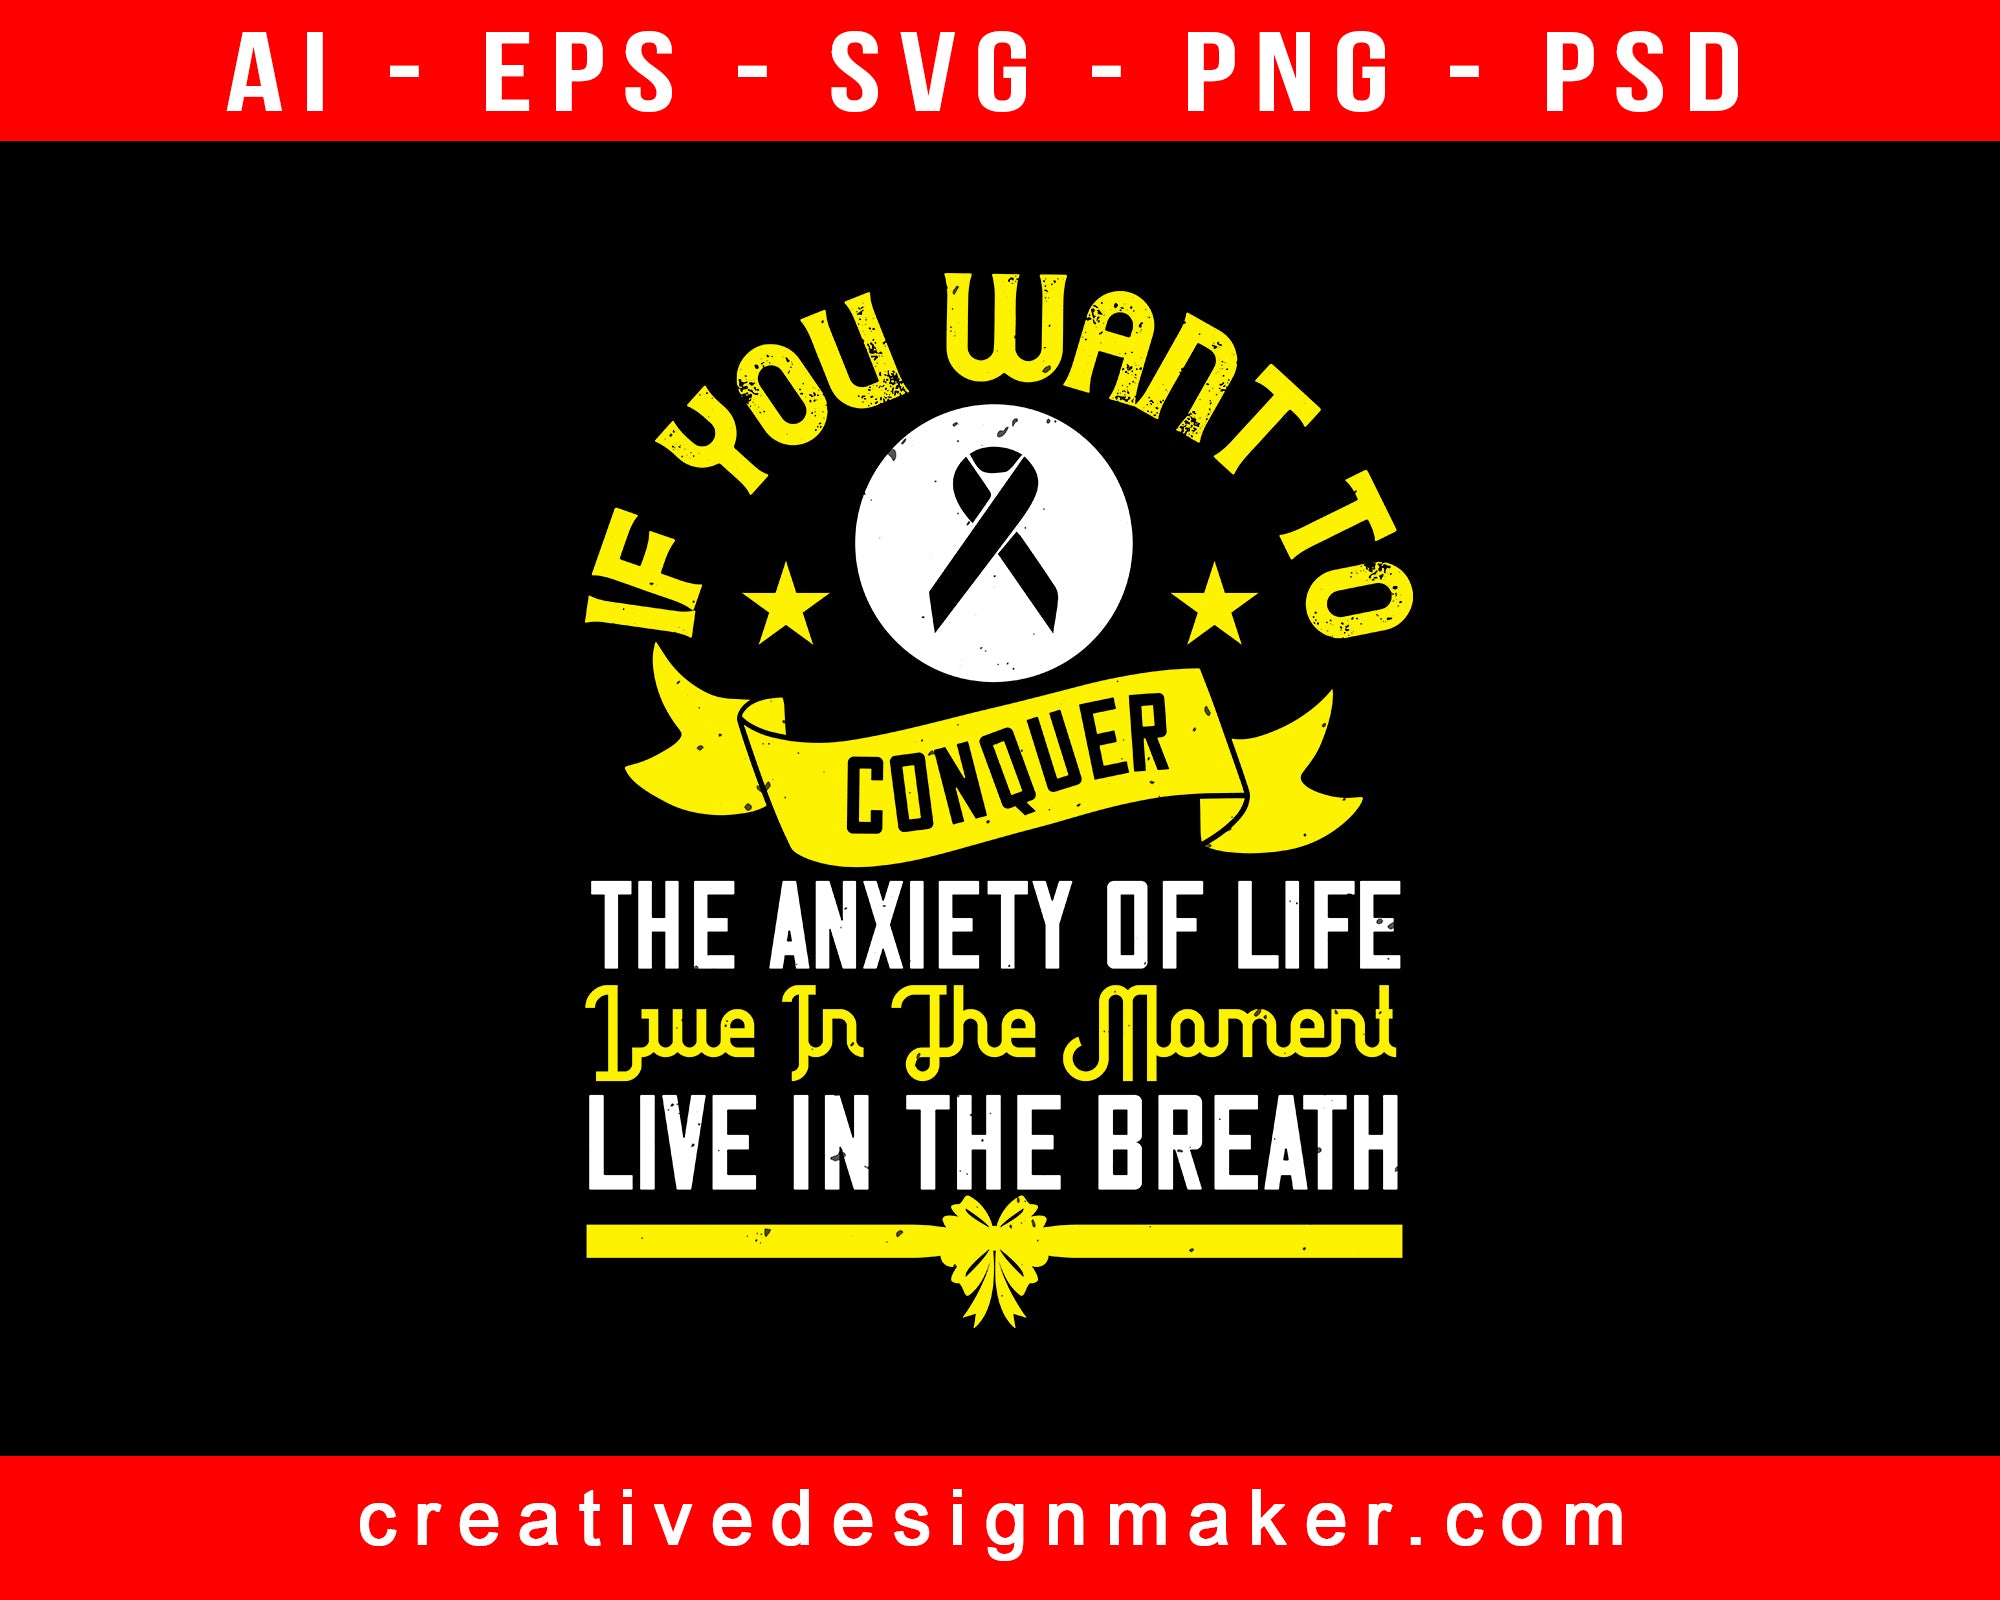 If You Want To Conquer The Anxiety Of Life, Live In The Moment, Live In The Breath Awareness Print Ready Editable T-Shirt SVG Design!